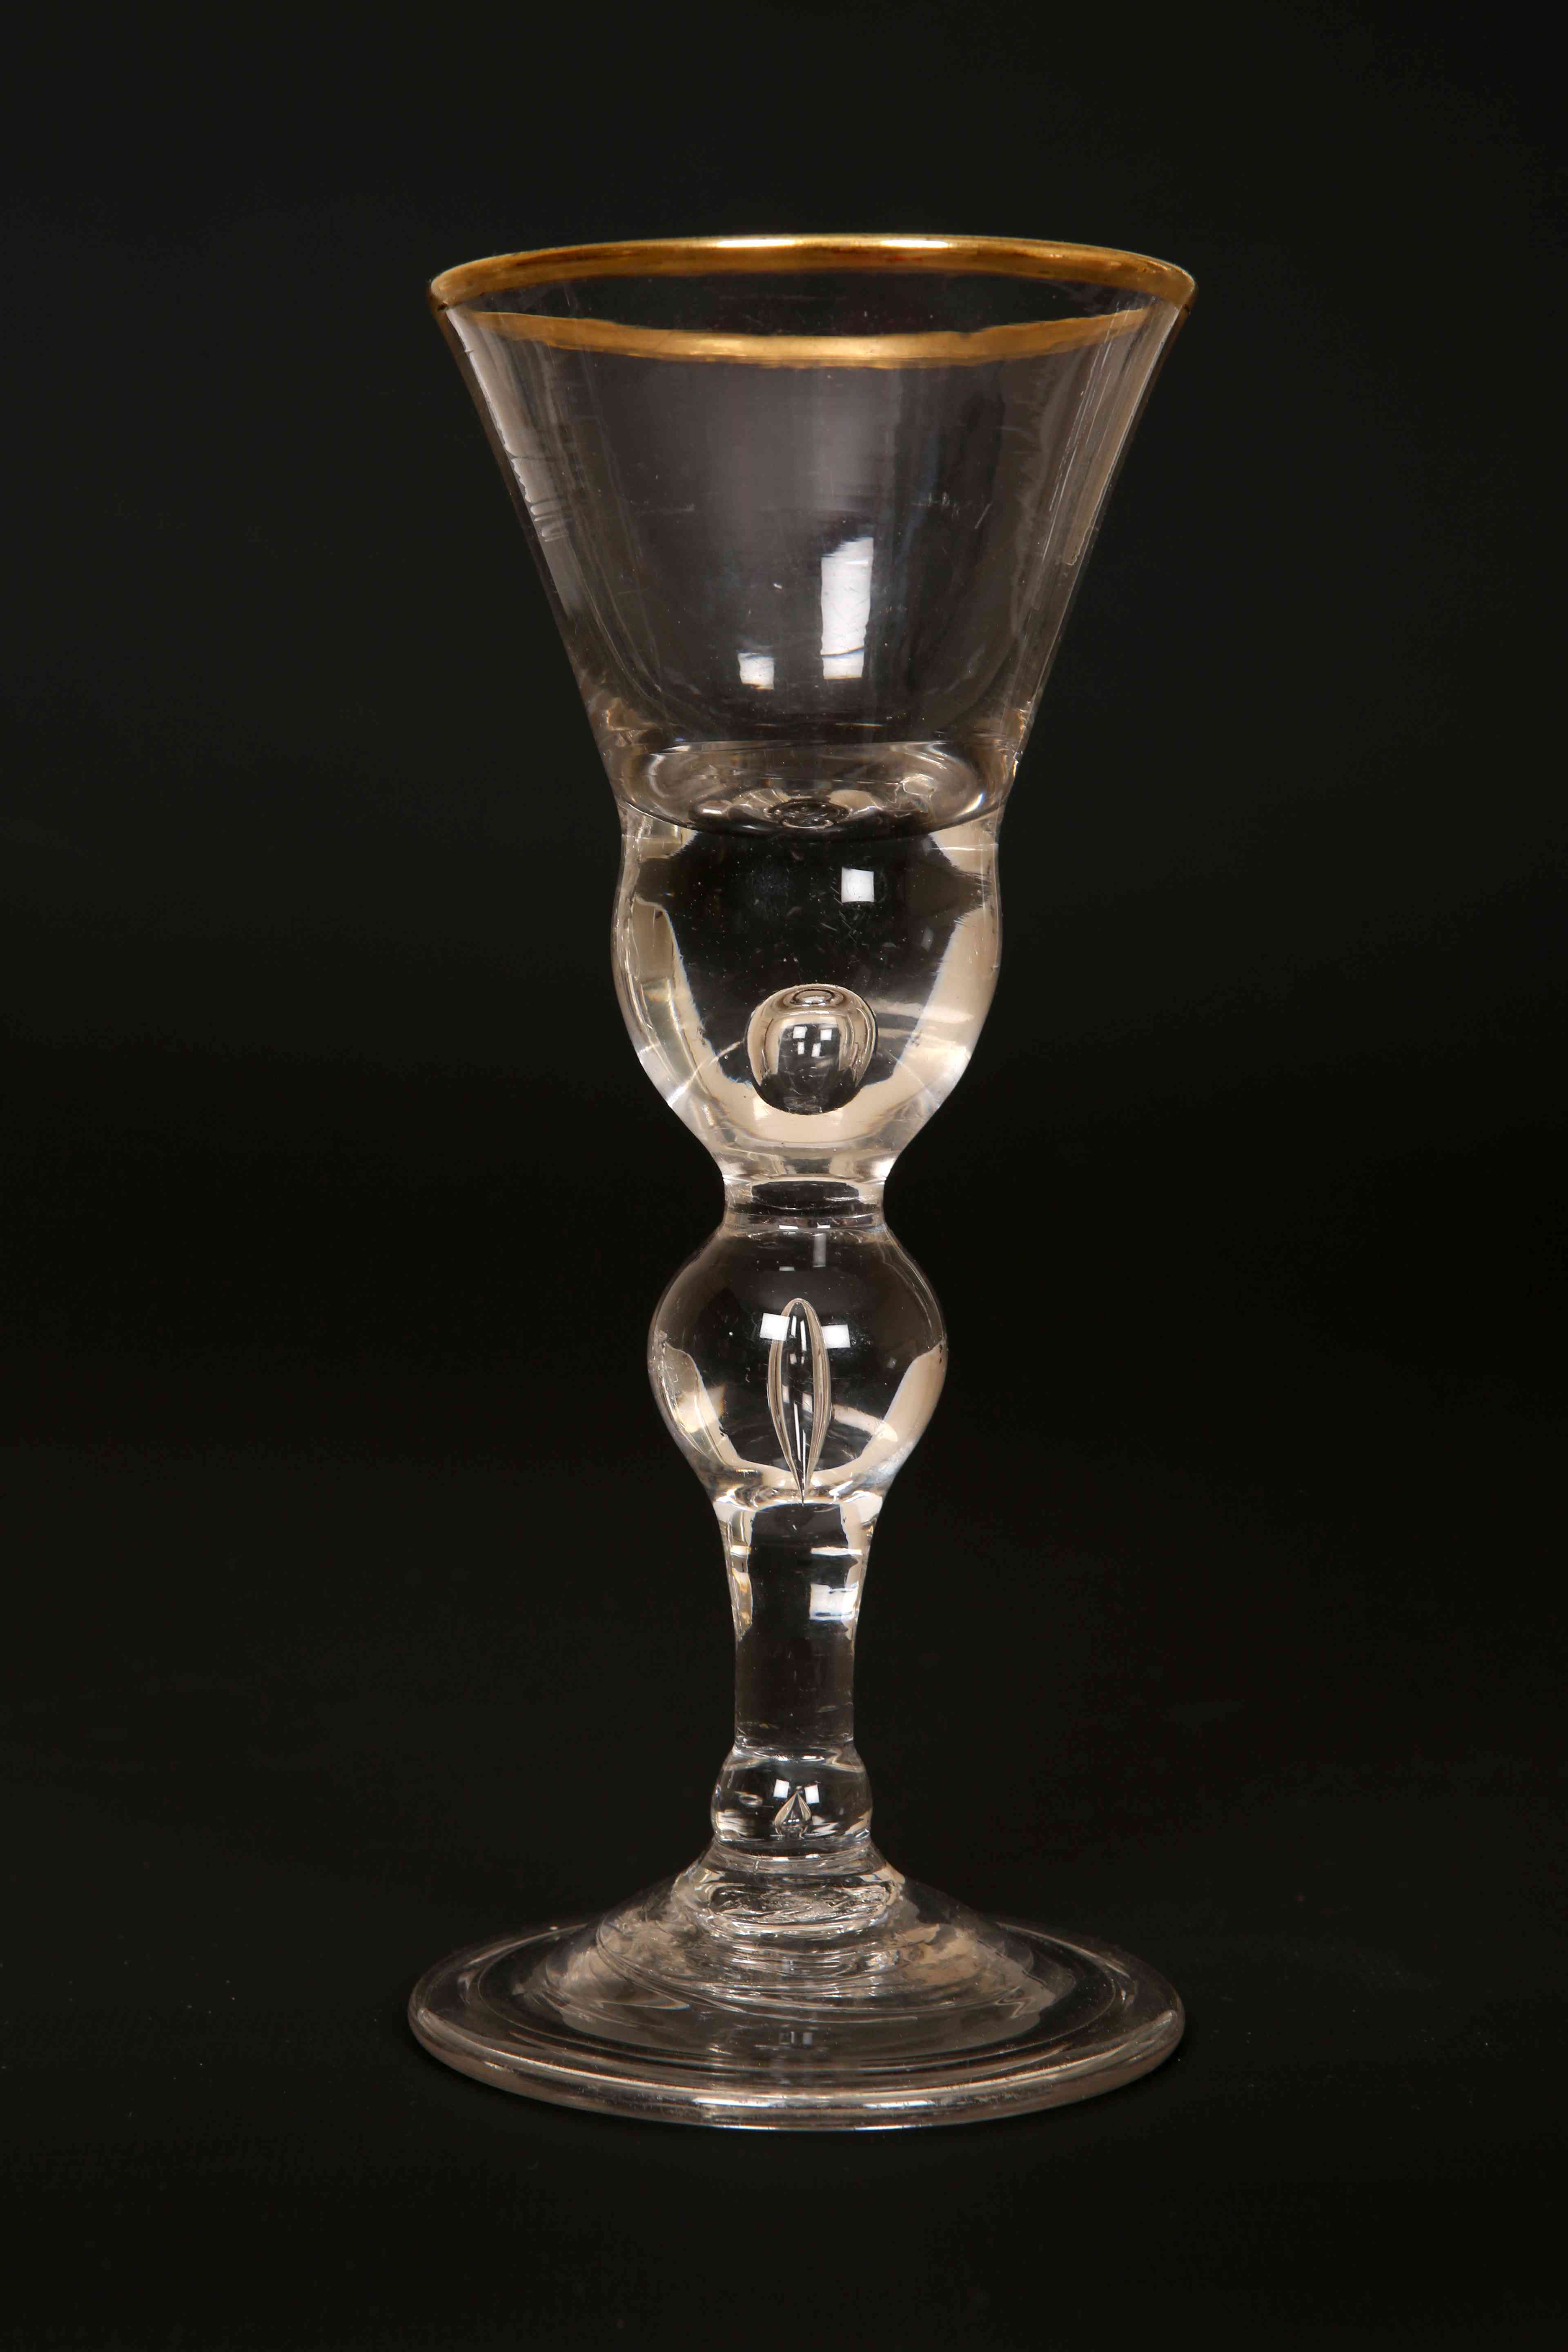 A LARGE 18TH CENTURY FOLDED FOOT WINE GLASS, with ball knop containing a tear drop, - Image 2 of 2